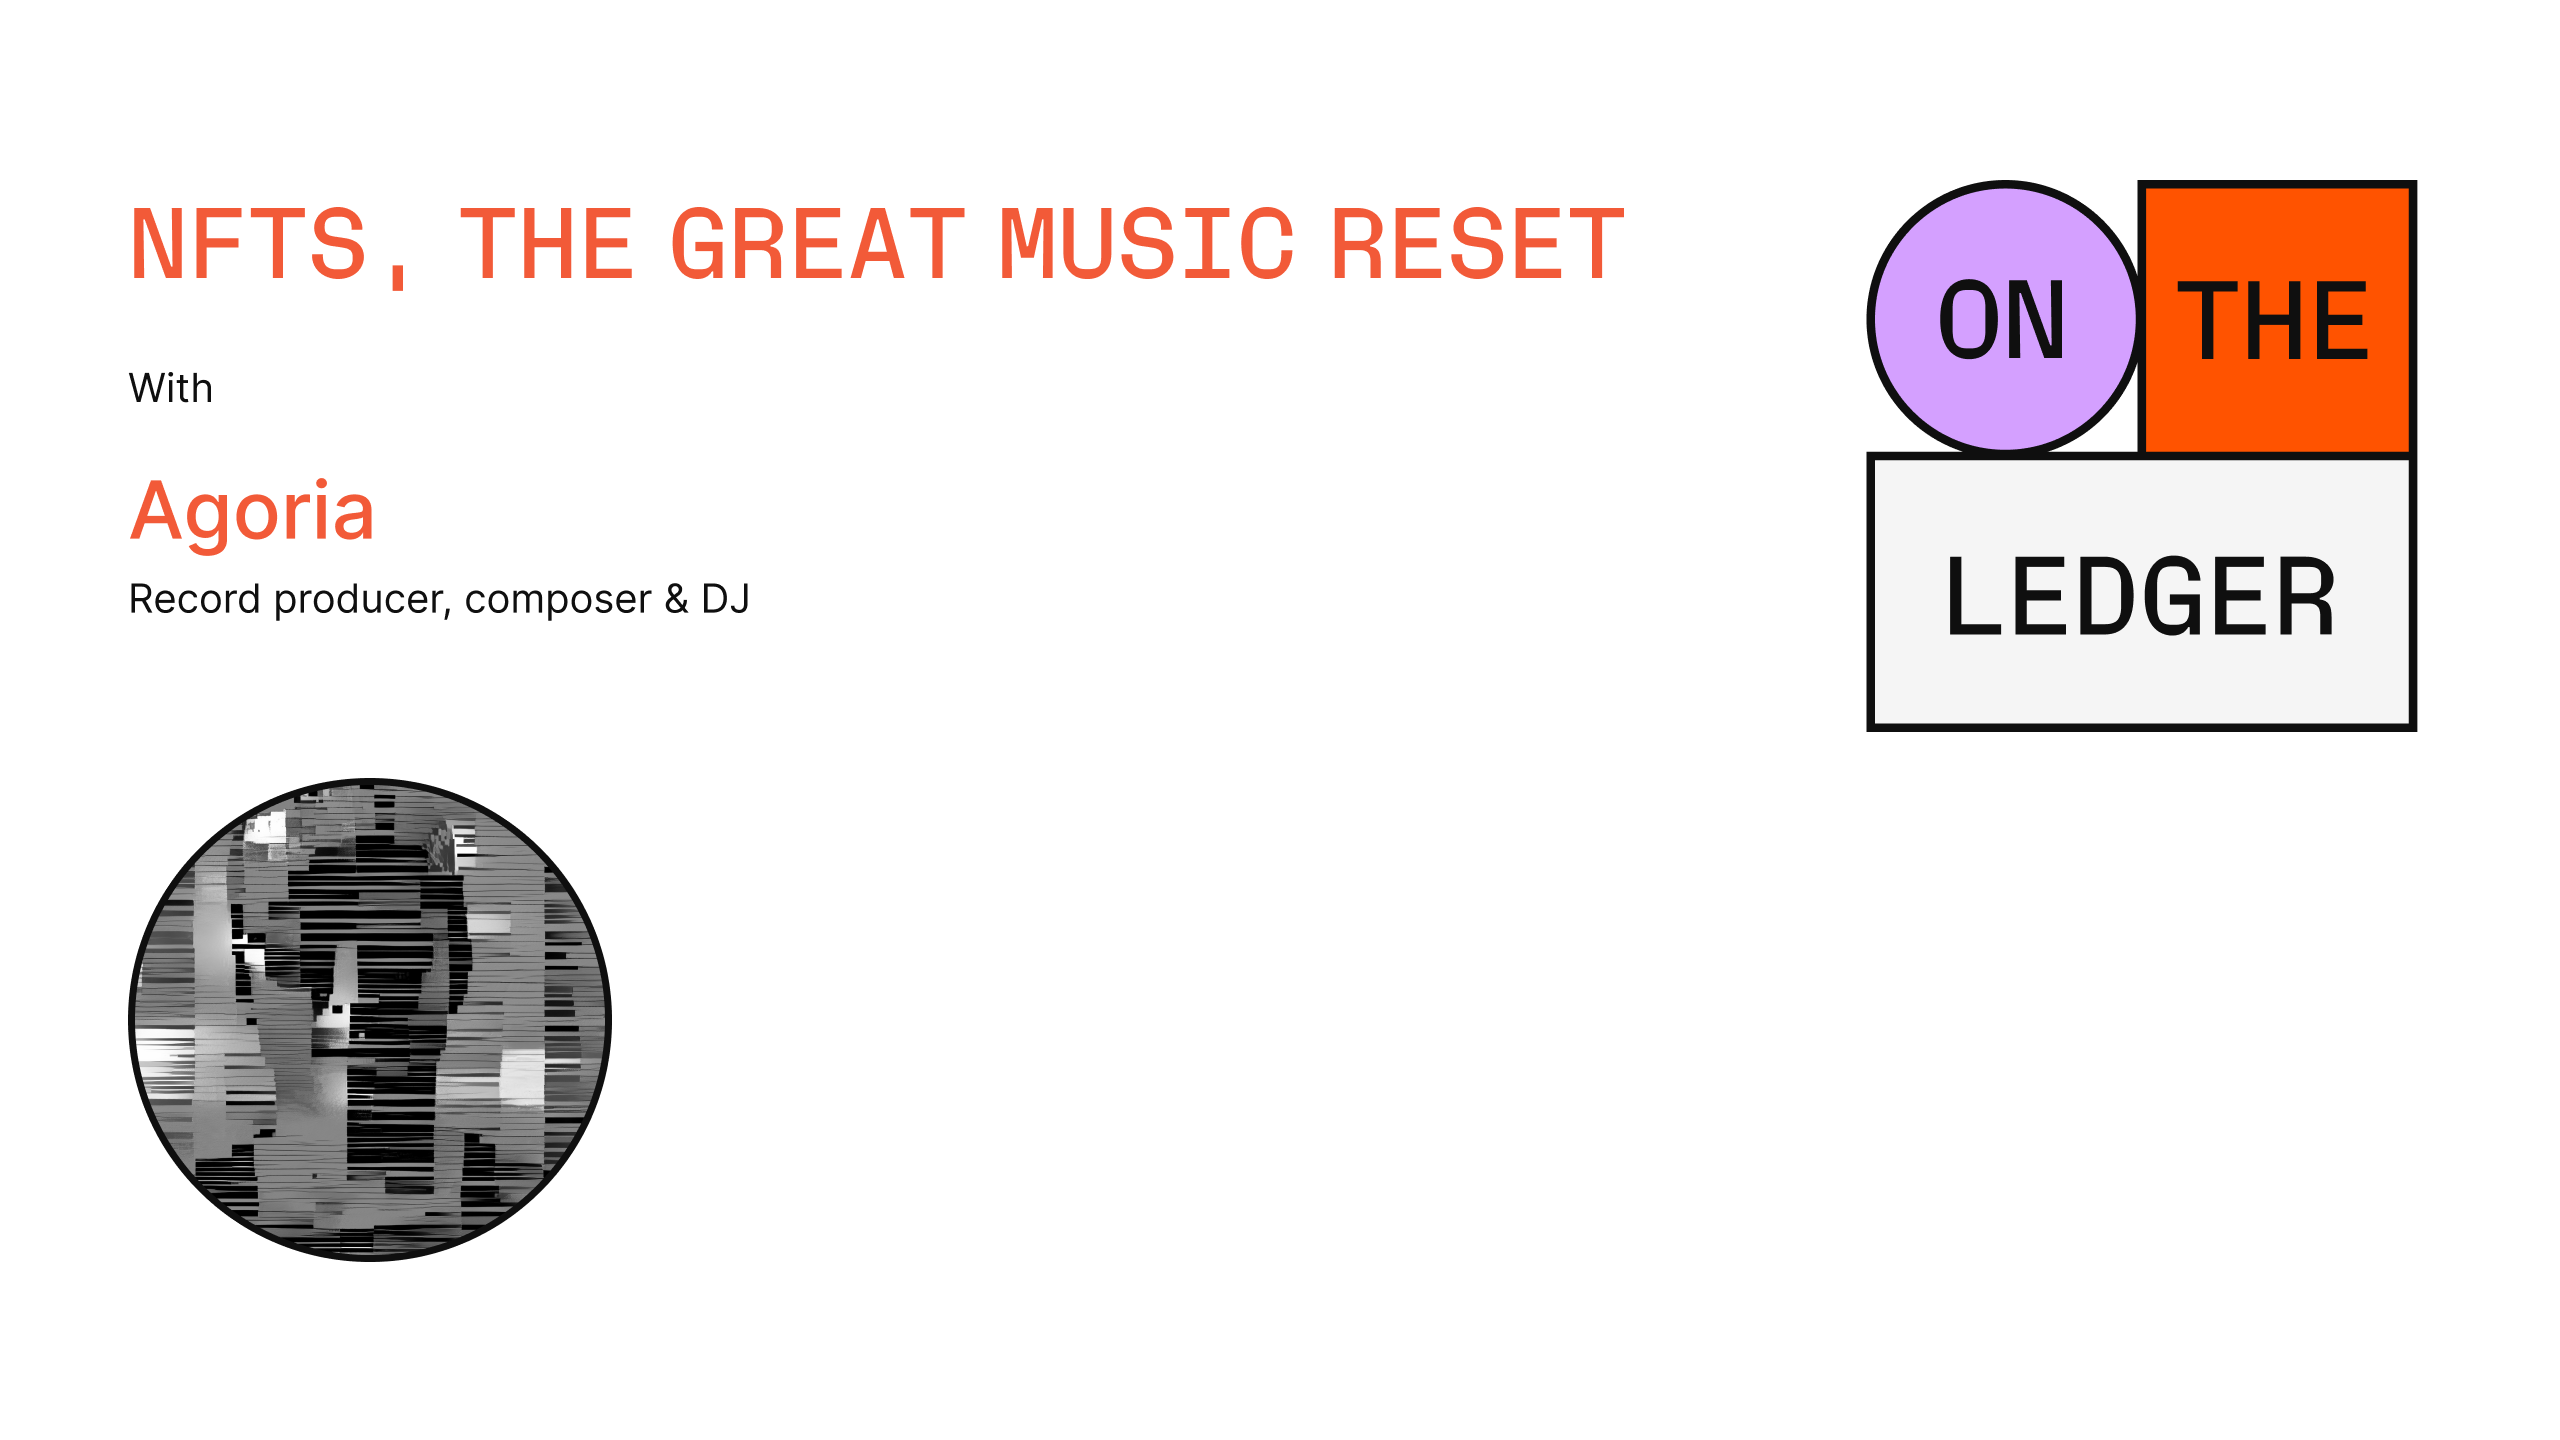 NFTs: the Great music reset w/ Agoria